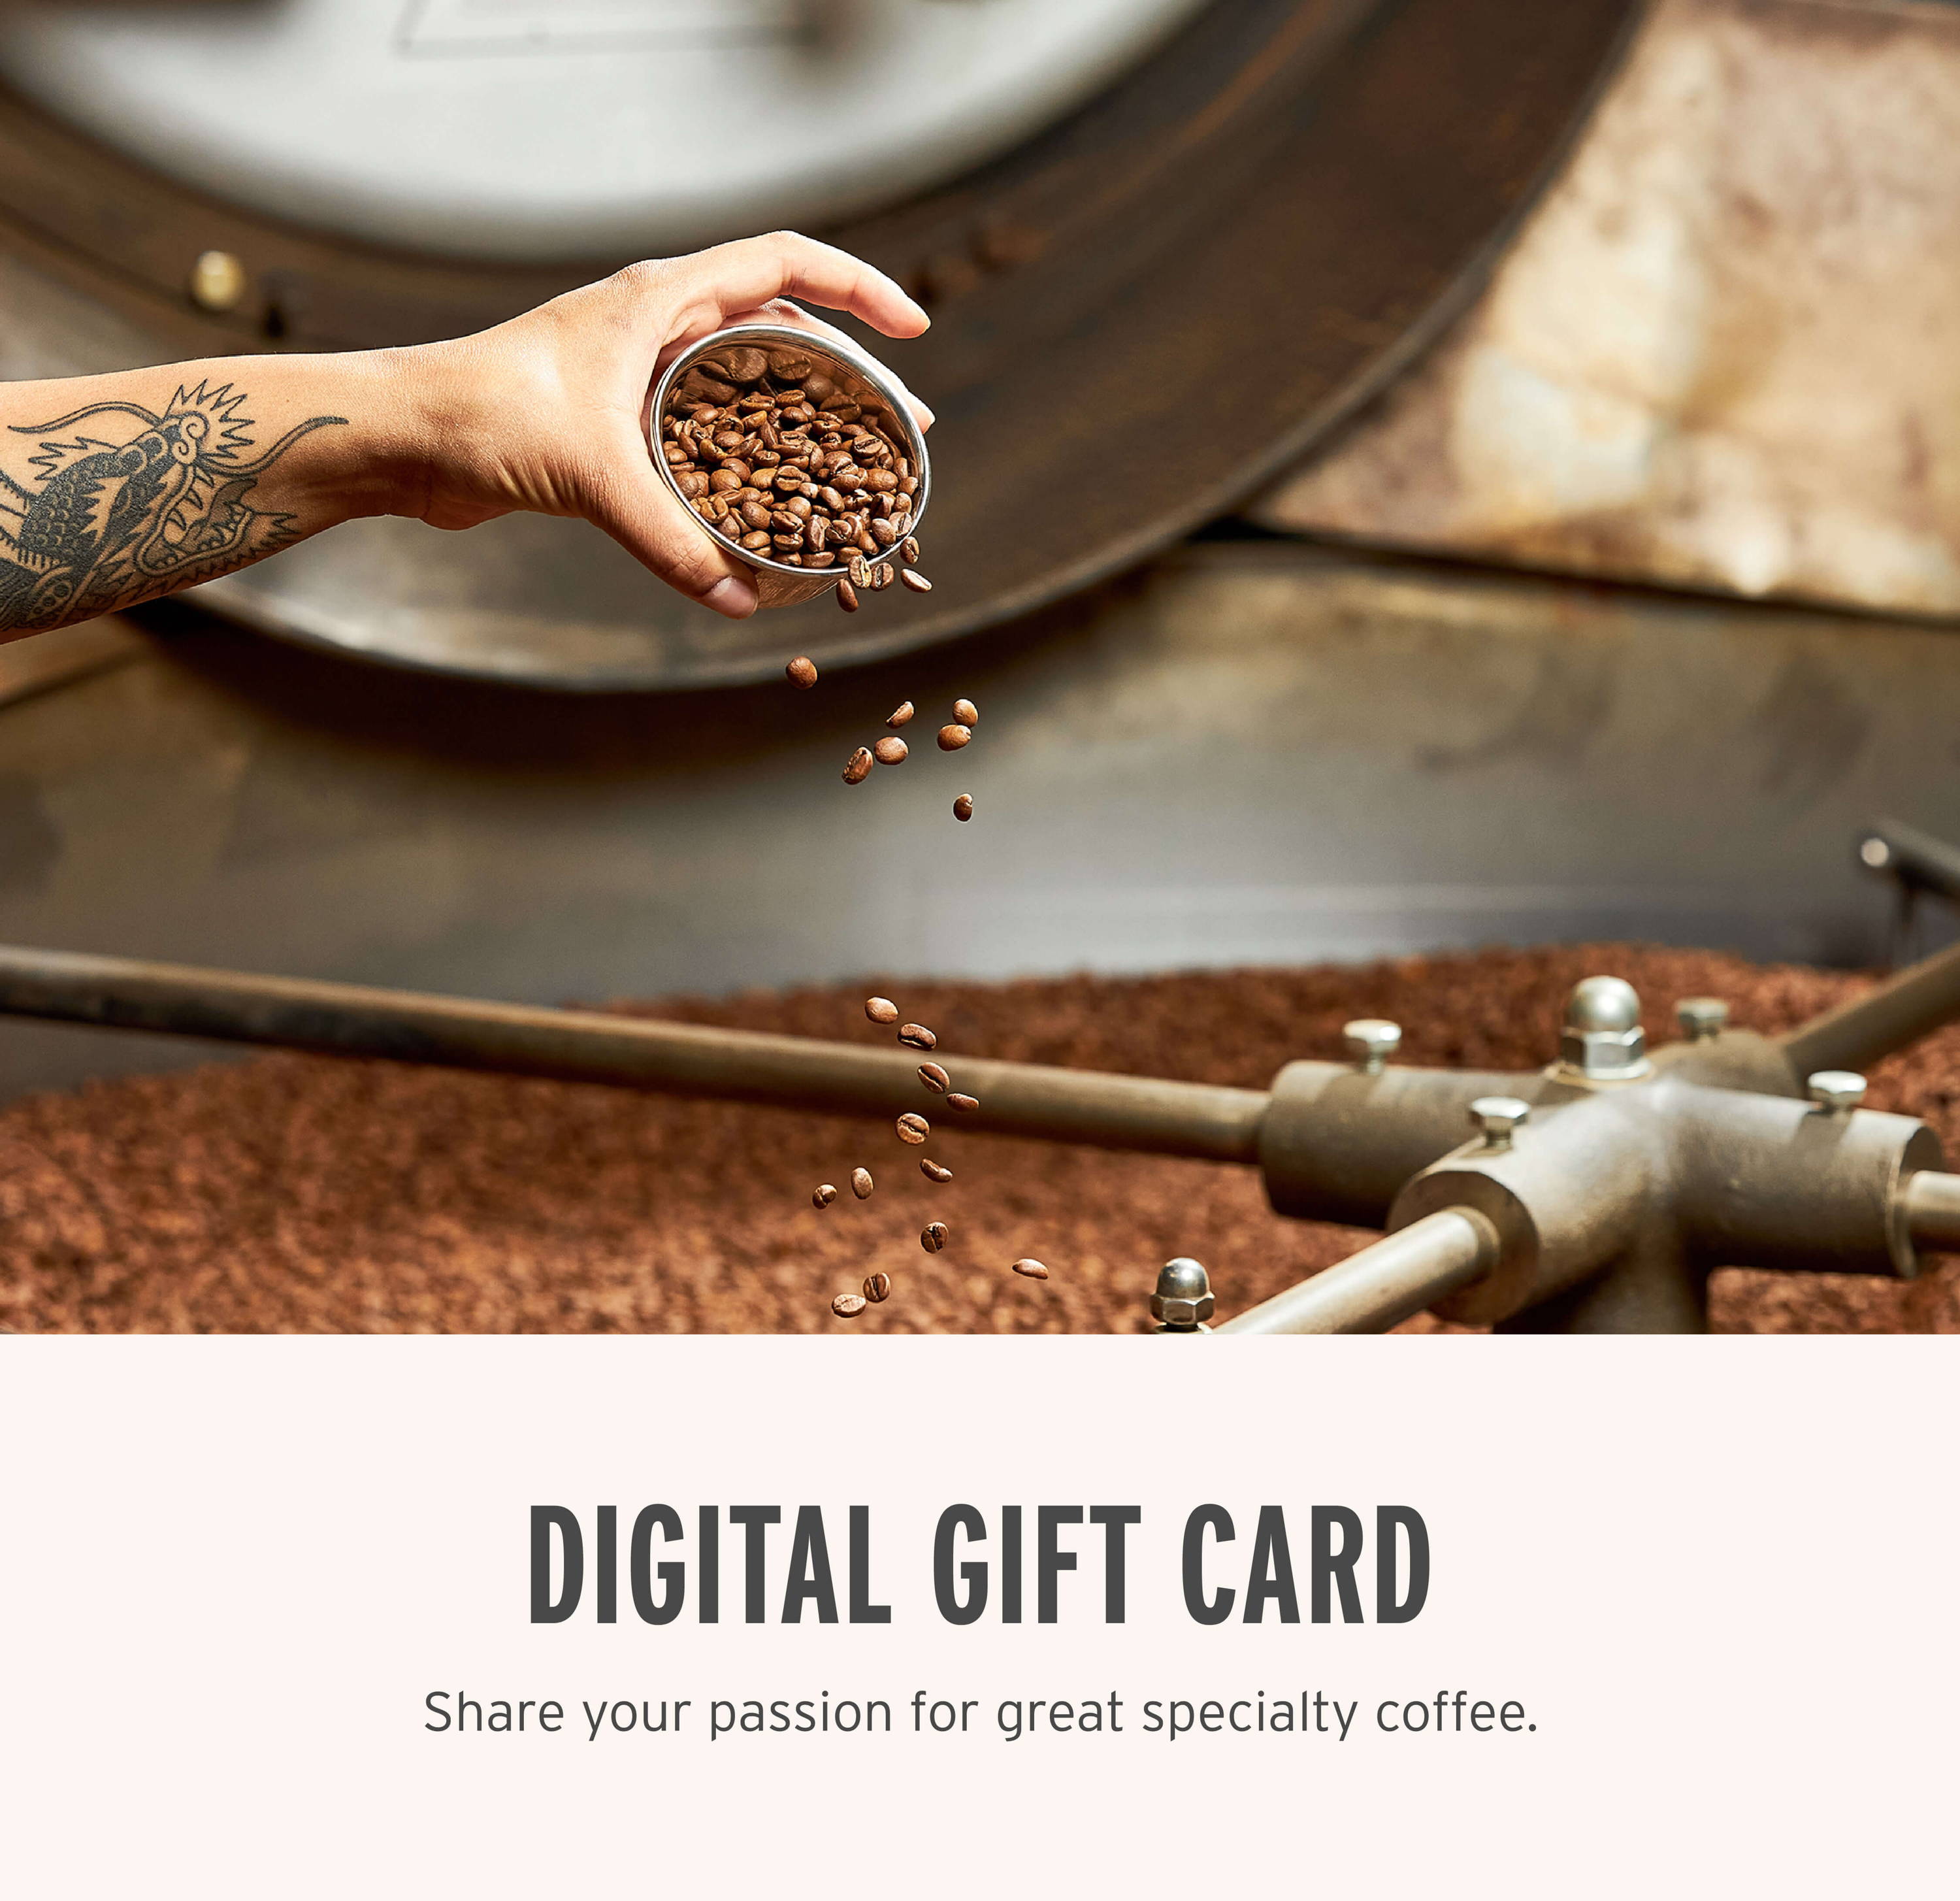 Digital Gift Card. Share you passion for great specialty coffee.